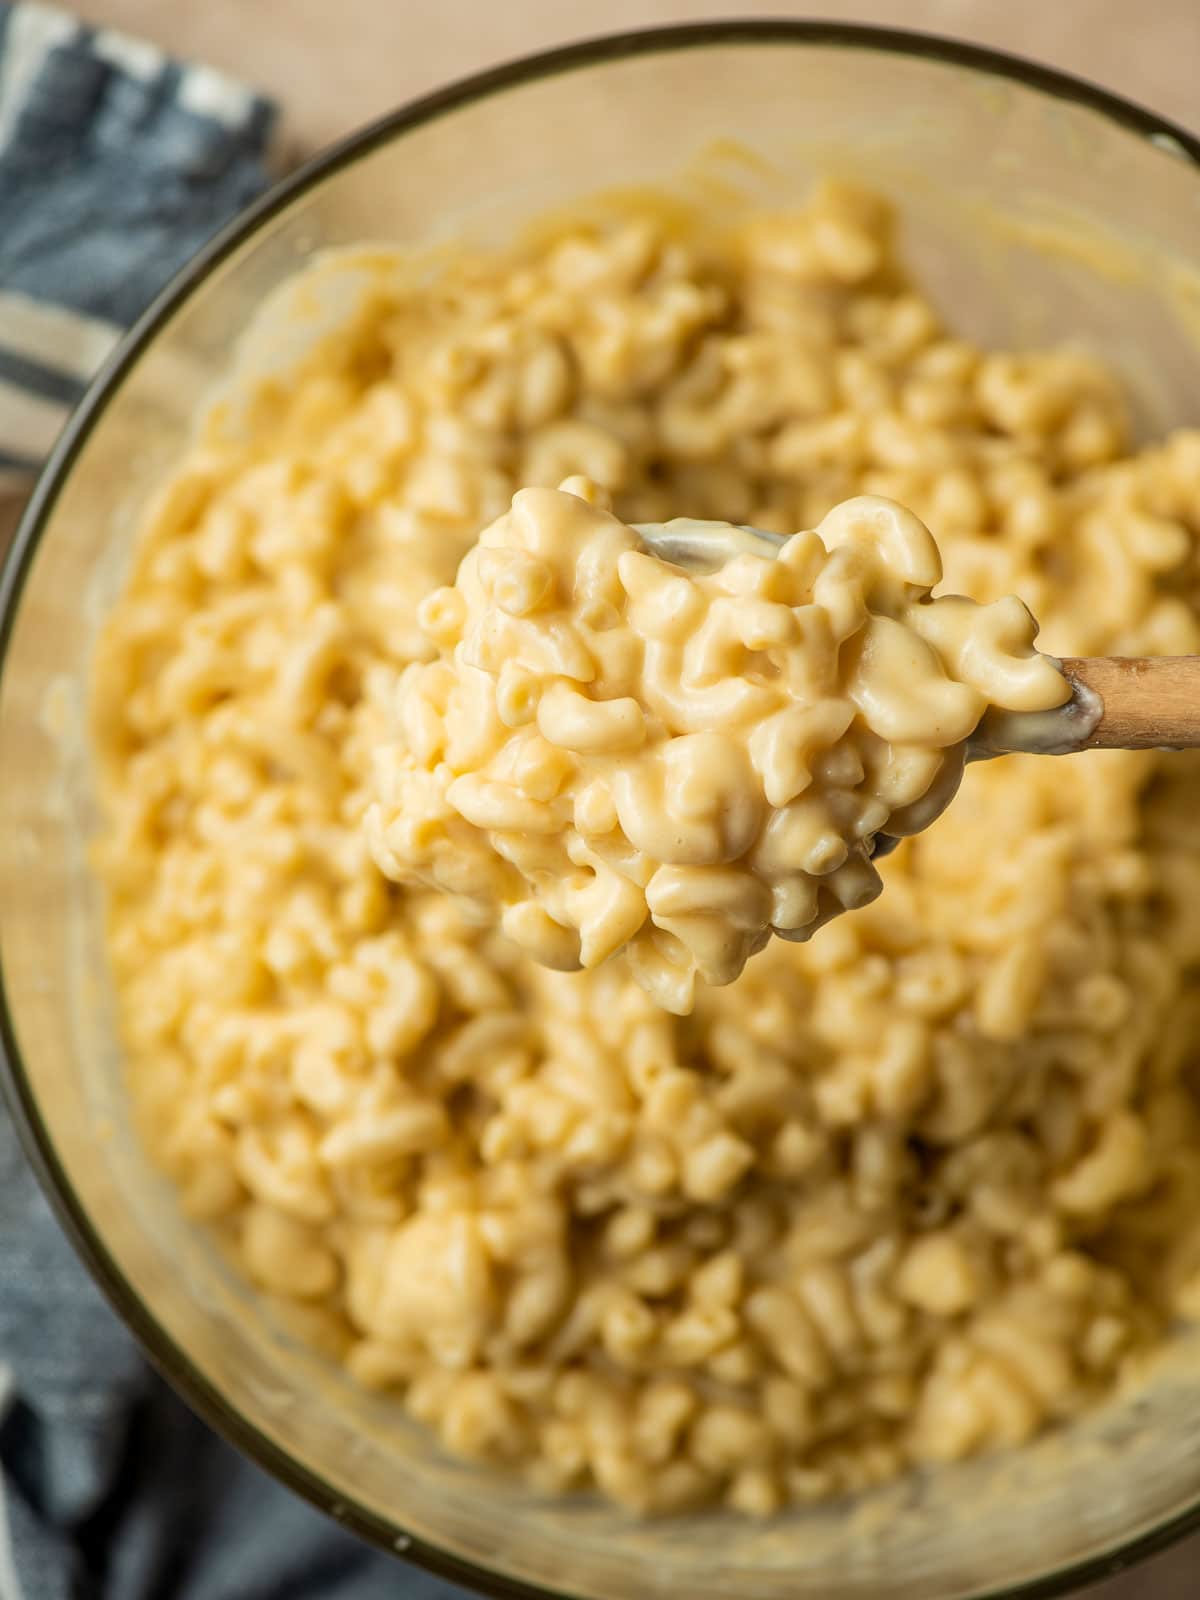 Wooden spoon scooping out creamy mac and cheese from a glass bowl.